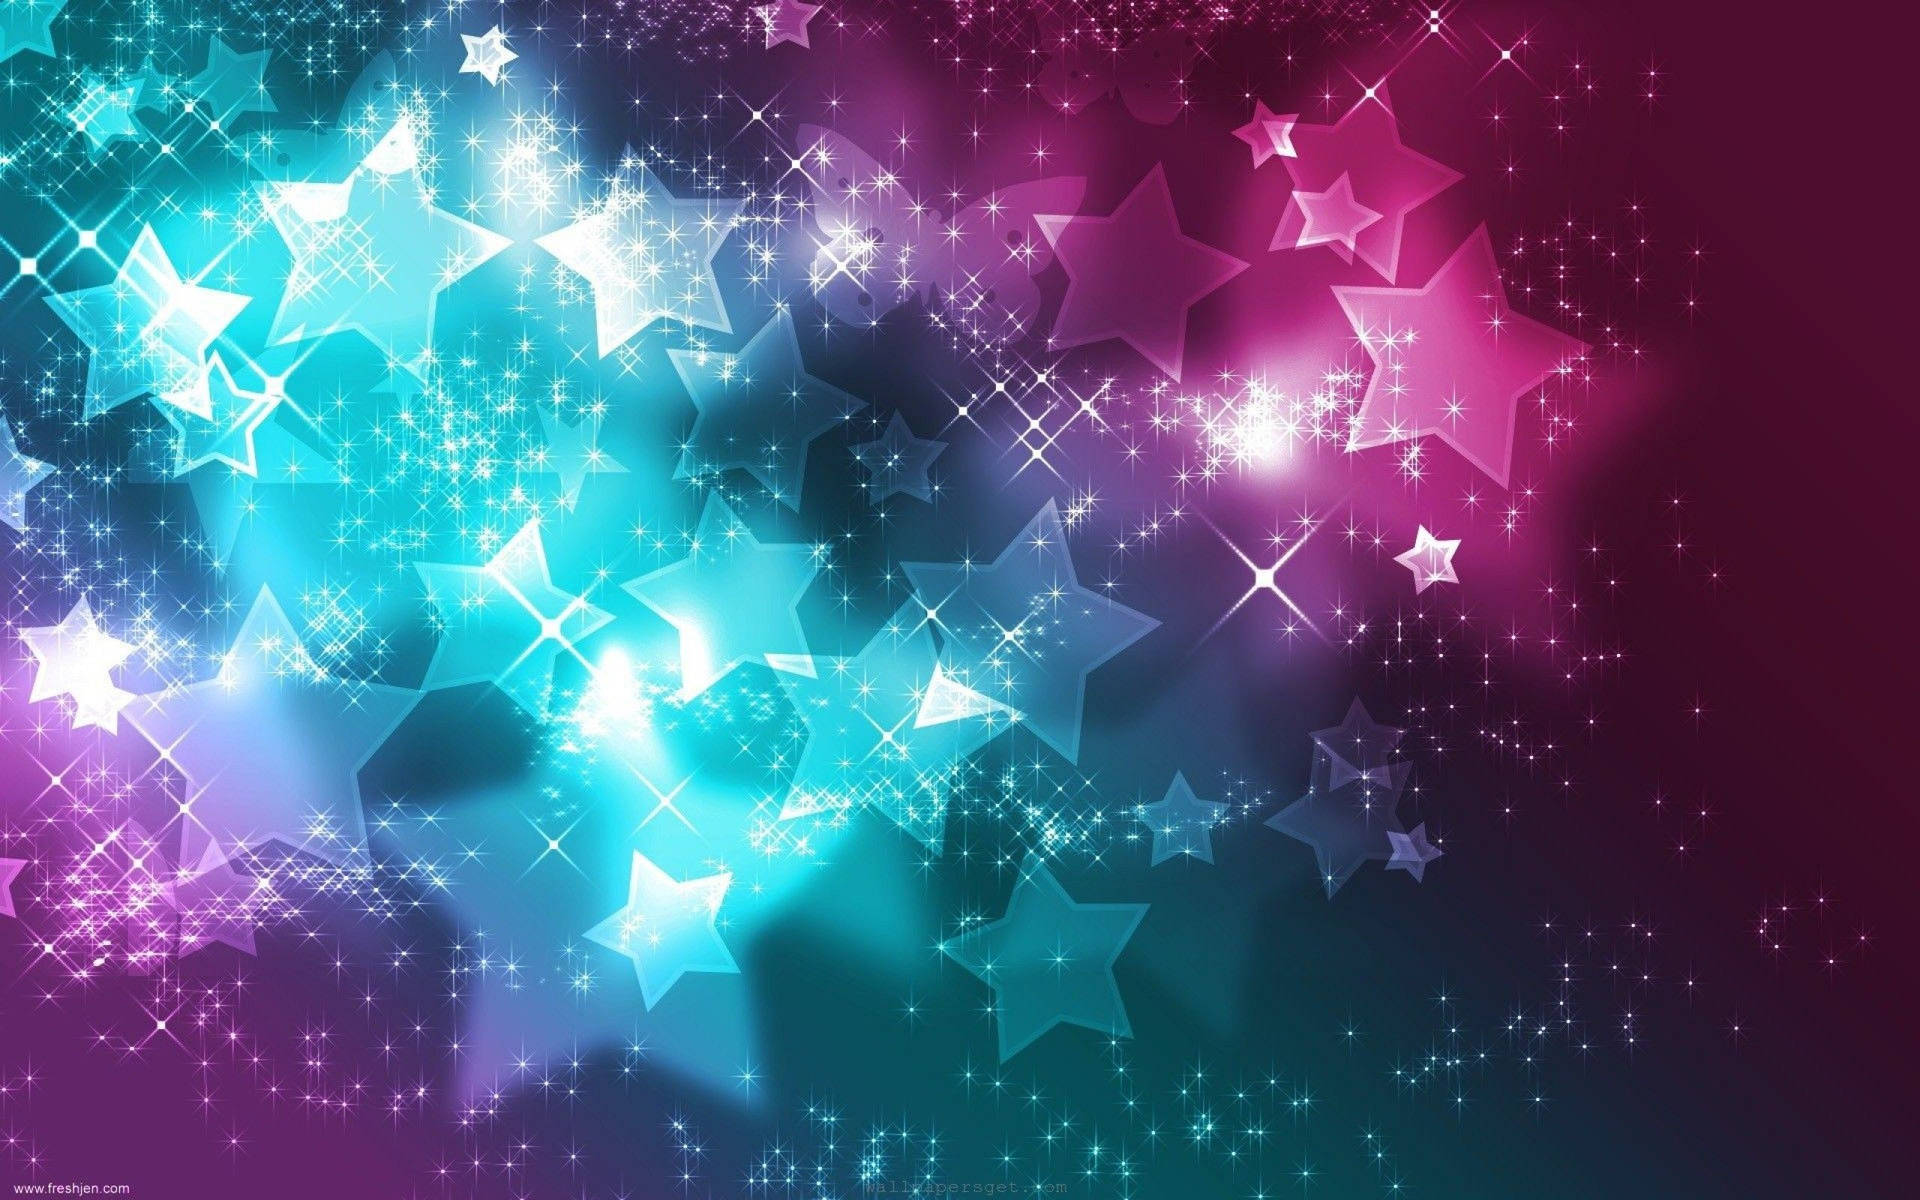 Brighten Your Day with Neon Stars Wallpaper